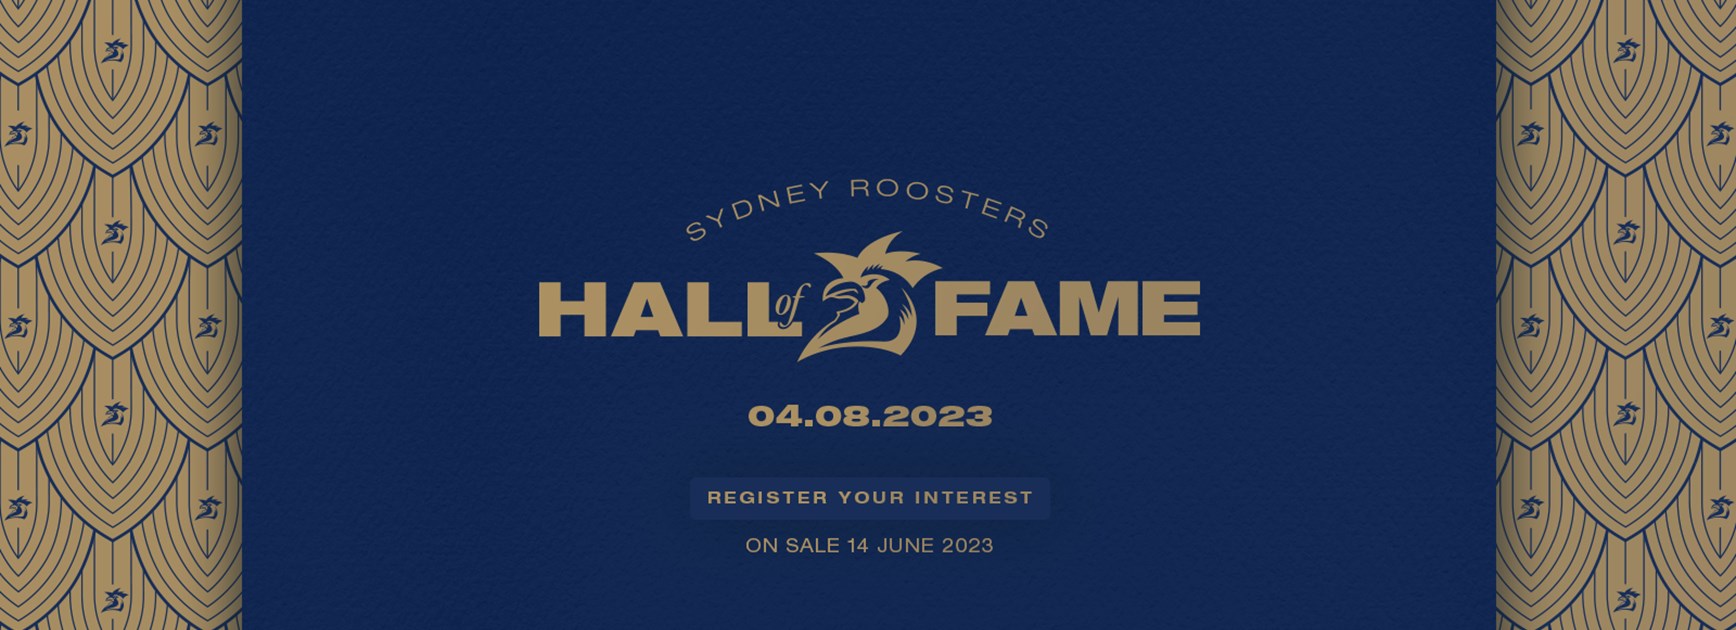 Register Your Interest for the Roosters Hall of Fame Induction!